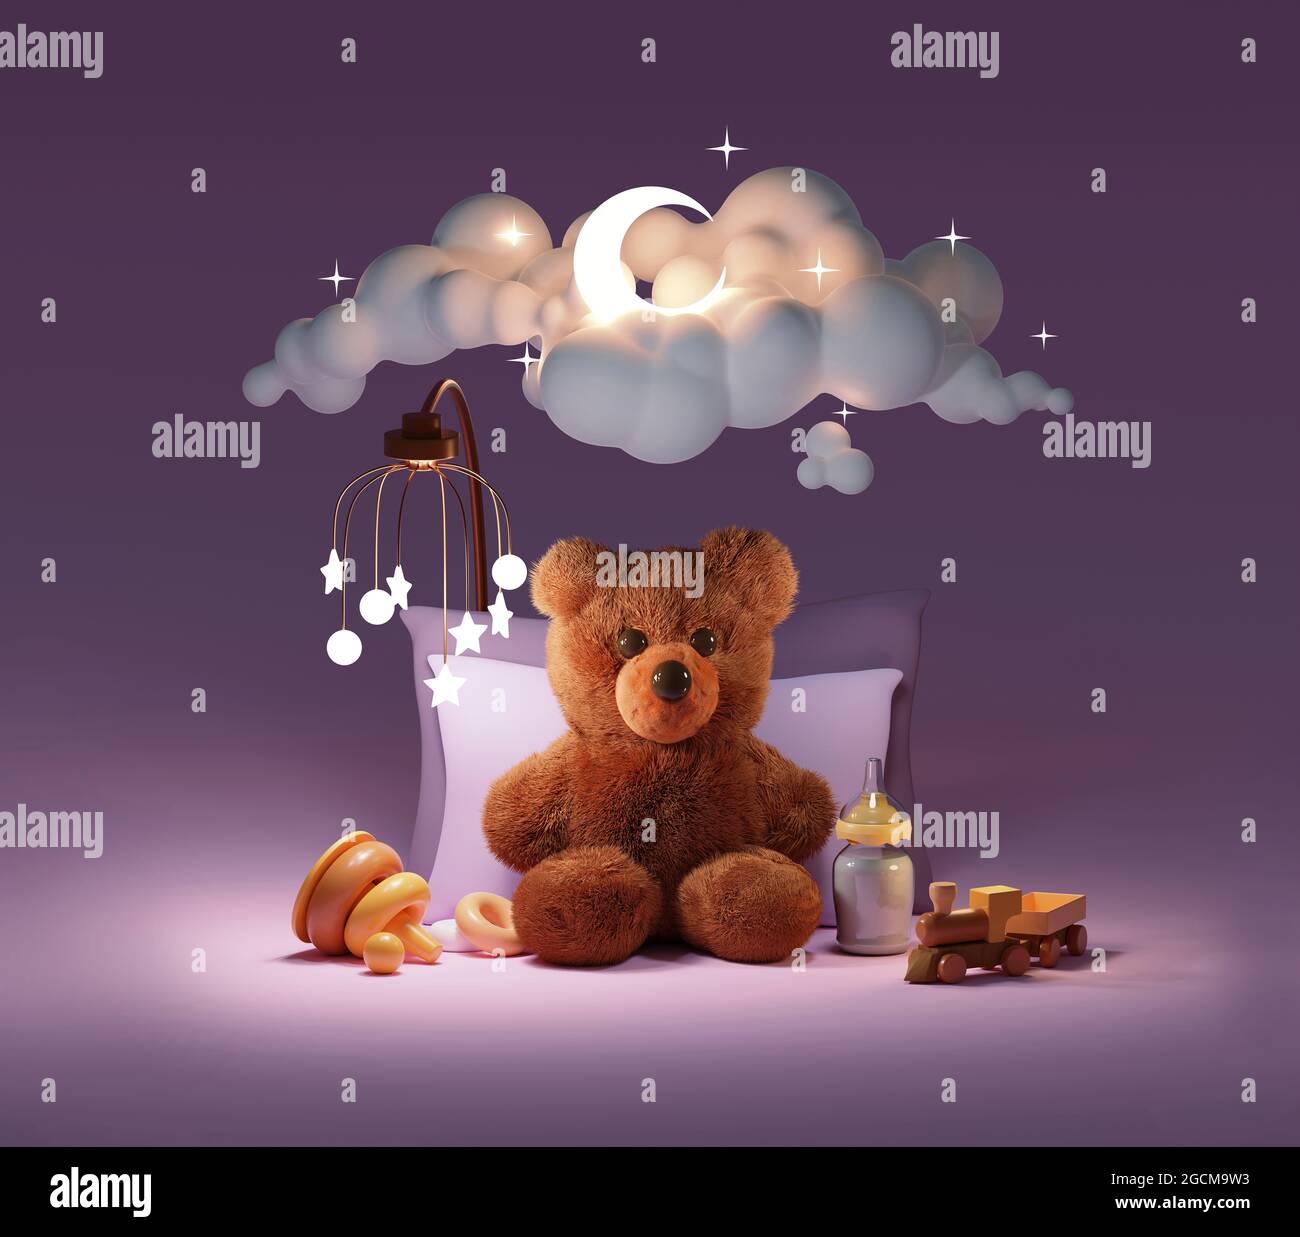 Fluffy baby teddy bear sleeping under the moon and stars. Teddy bear on pillows with toys, mobile, and baby milk bottle. Cloudy sky, moon and stars Stock Photo